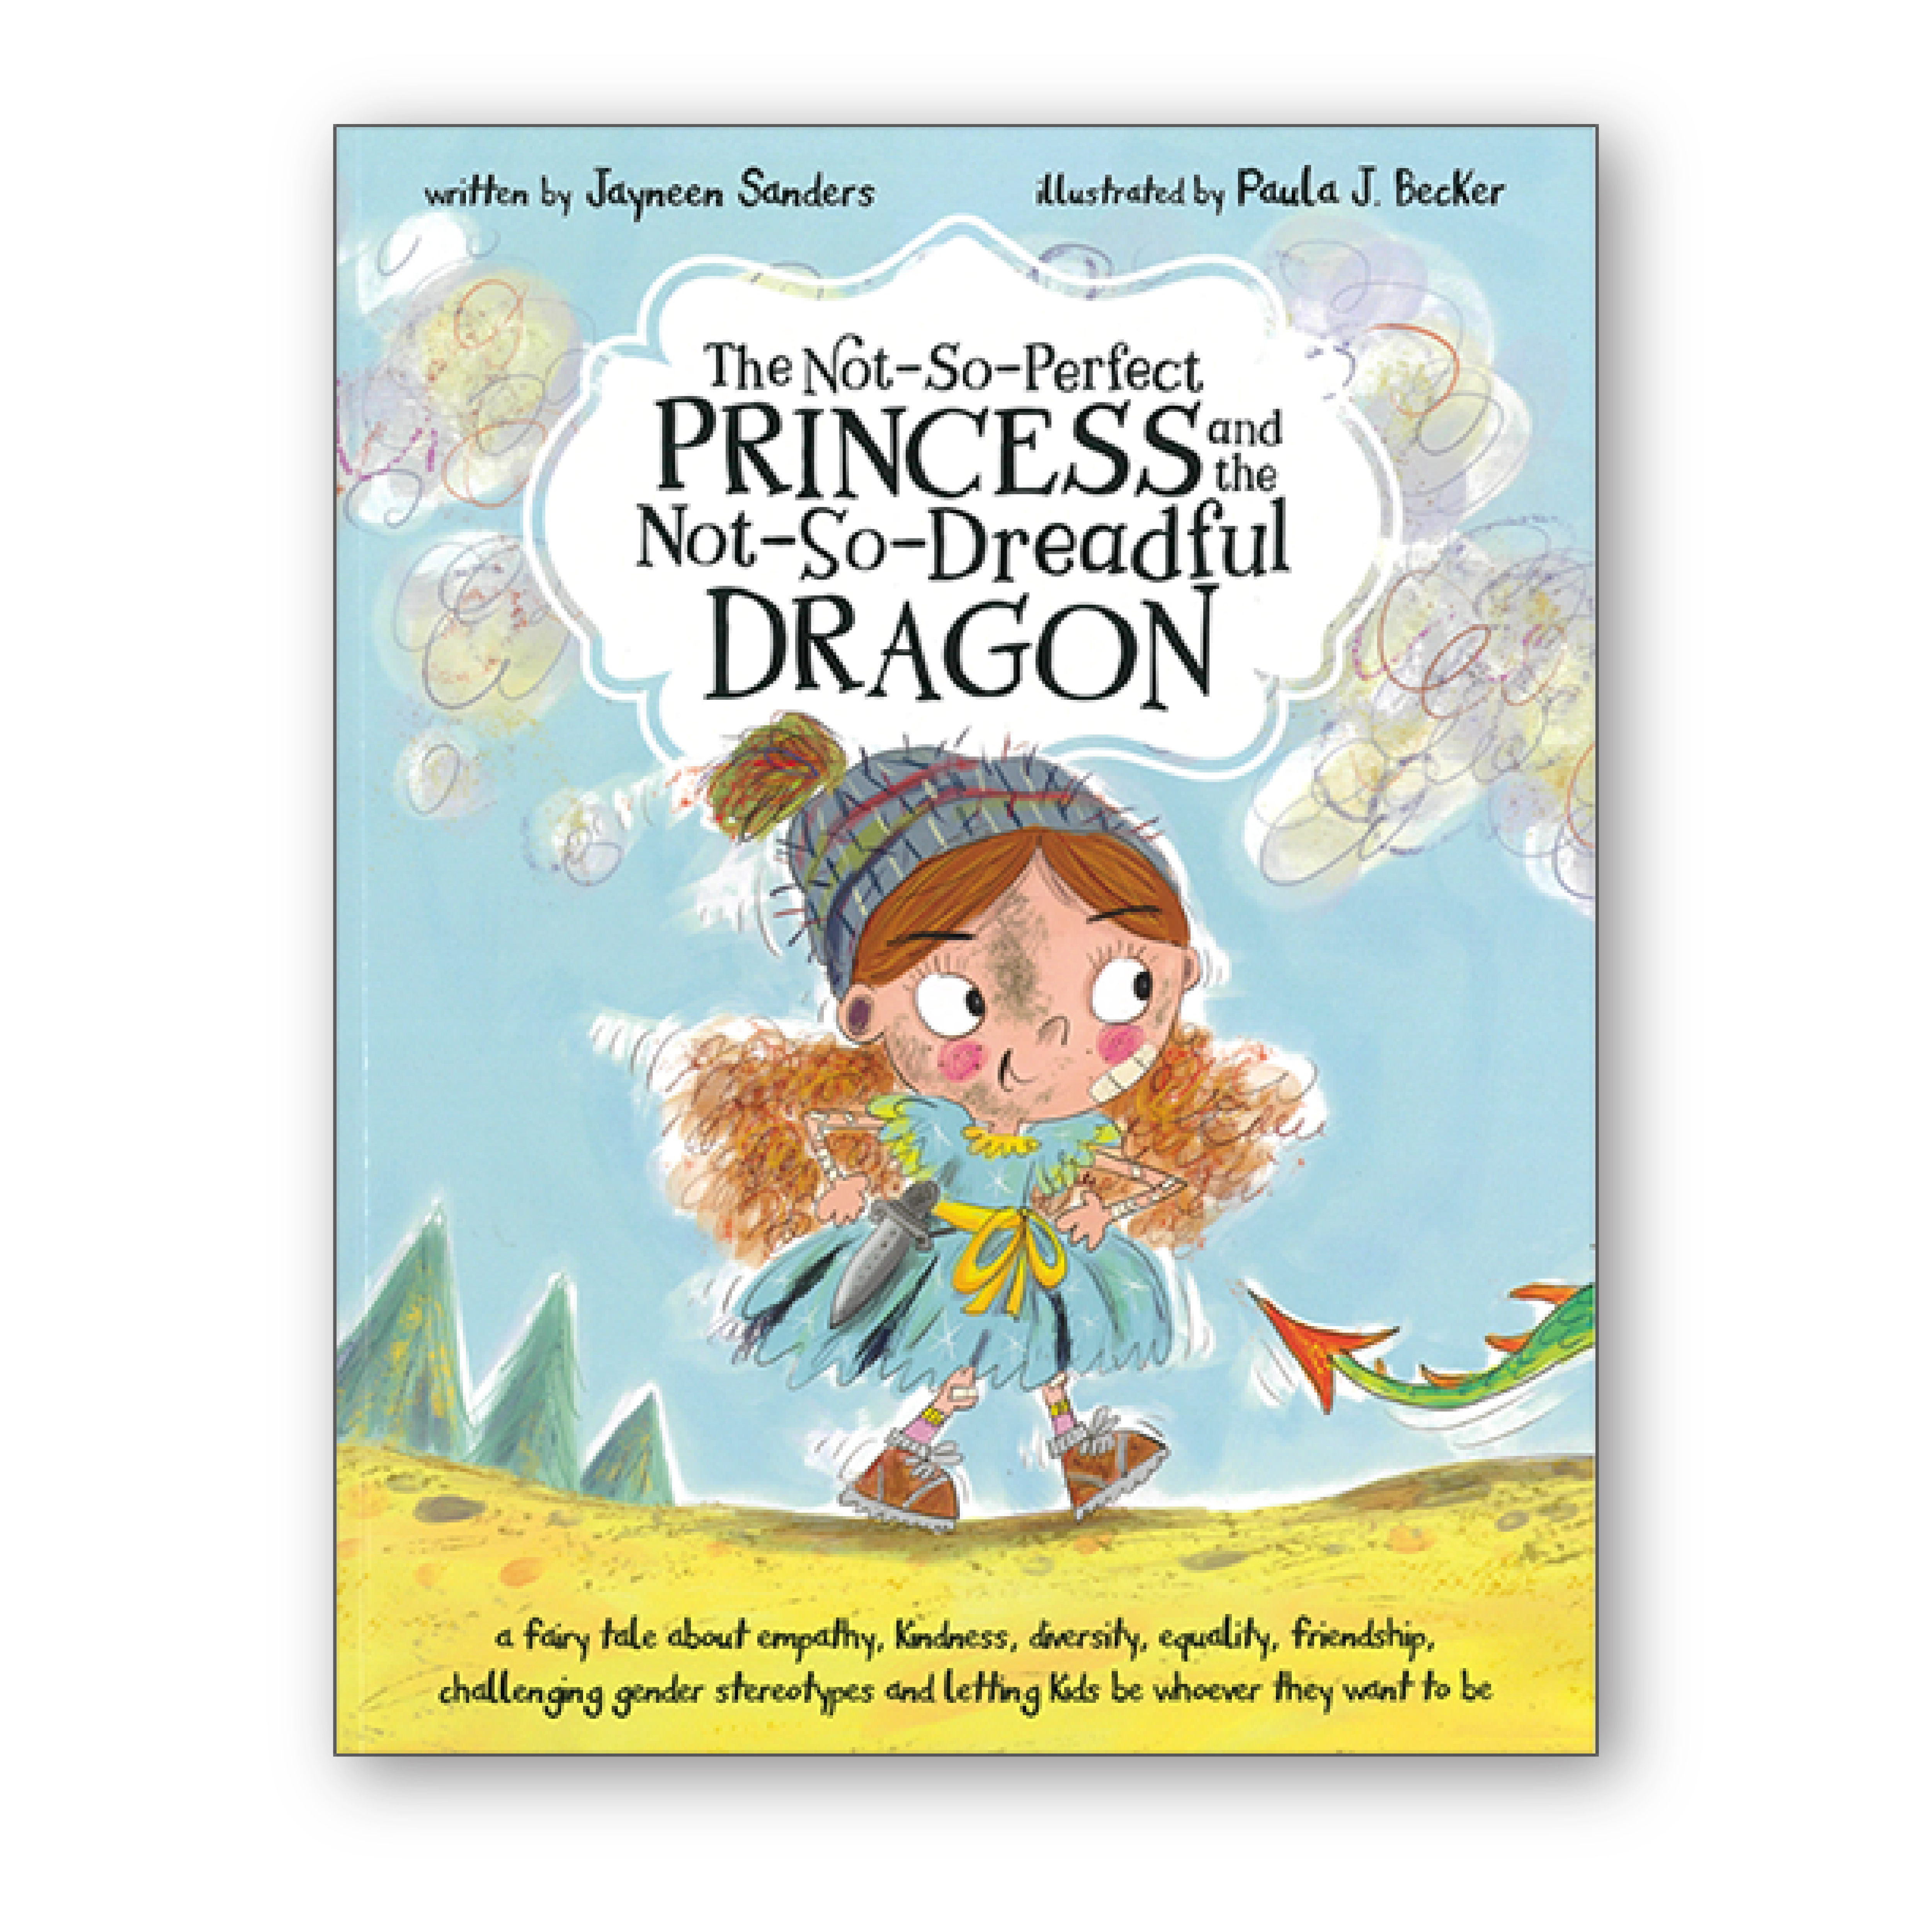 The not-so-perfect princess and the not-so-dreadful dragon by jayneen sanders